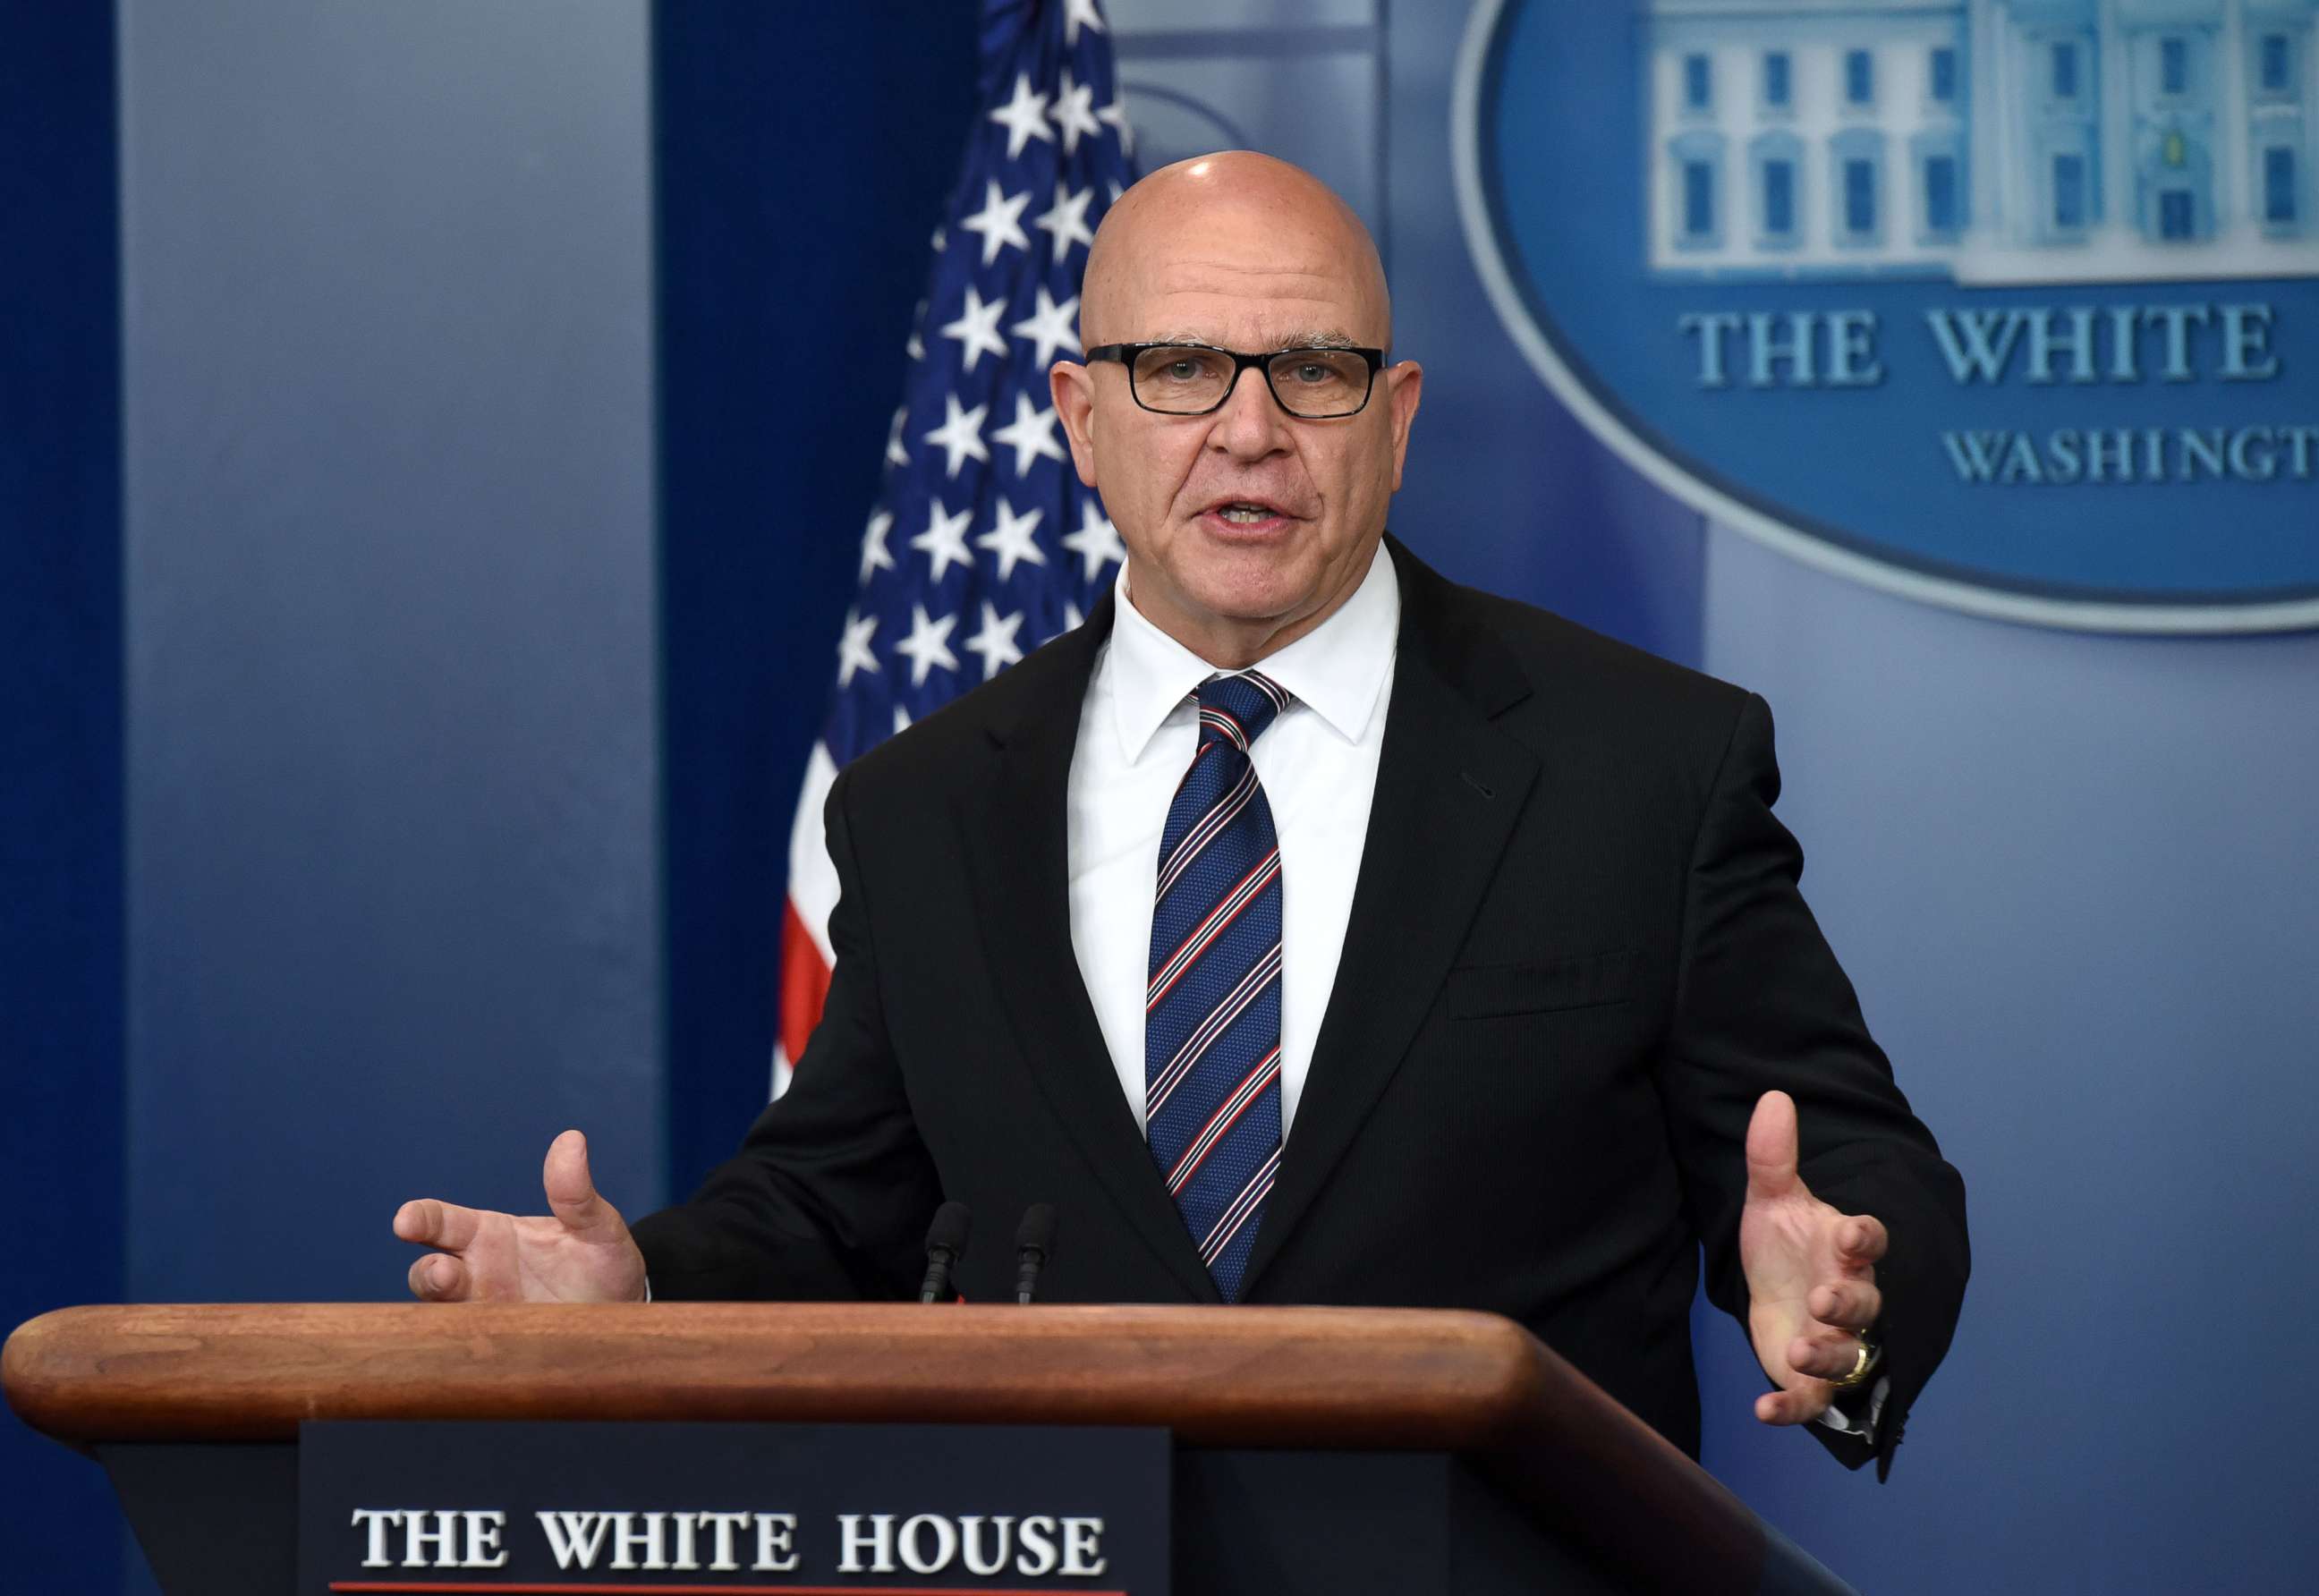 PHOTO: National Security Advisor H. R. McMaster speaks during a press briefing at the White House in Washington, D.C., May 16, 2017.